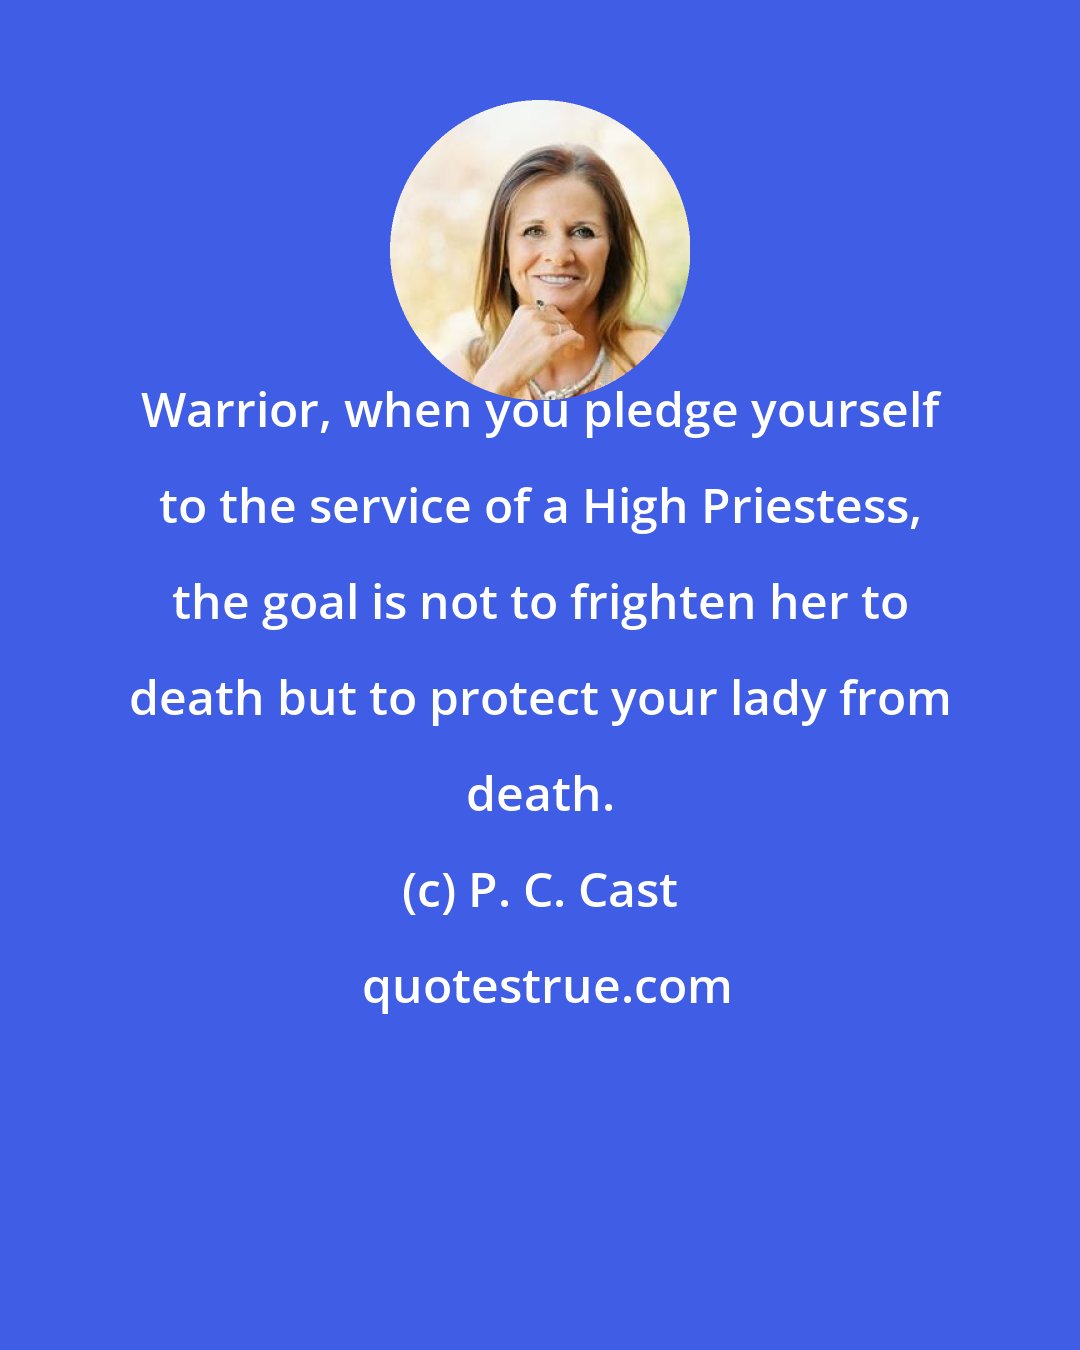 P. C. Cast: Warrior, when you pledge yourself to the service of a High Priestess, the goal is not to frighten her to death but to protect your lady from death.